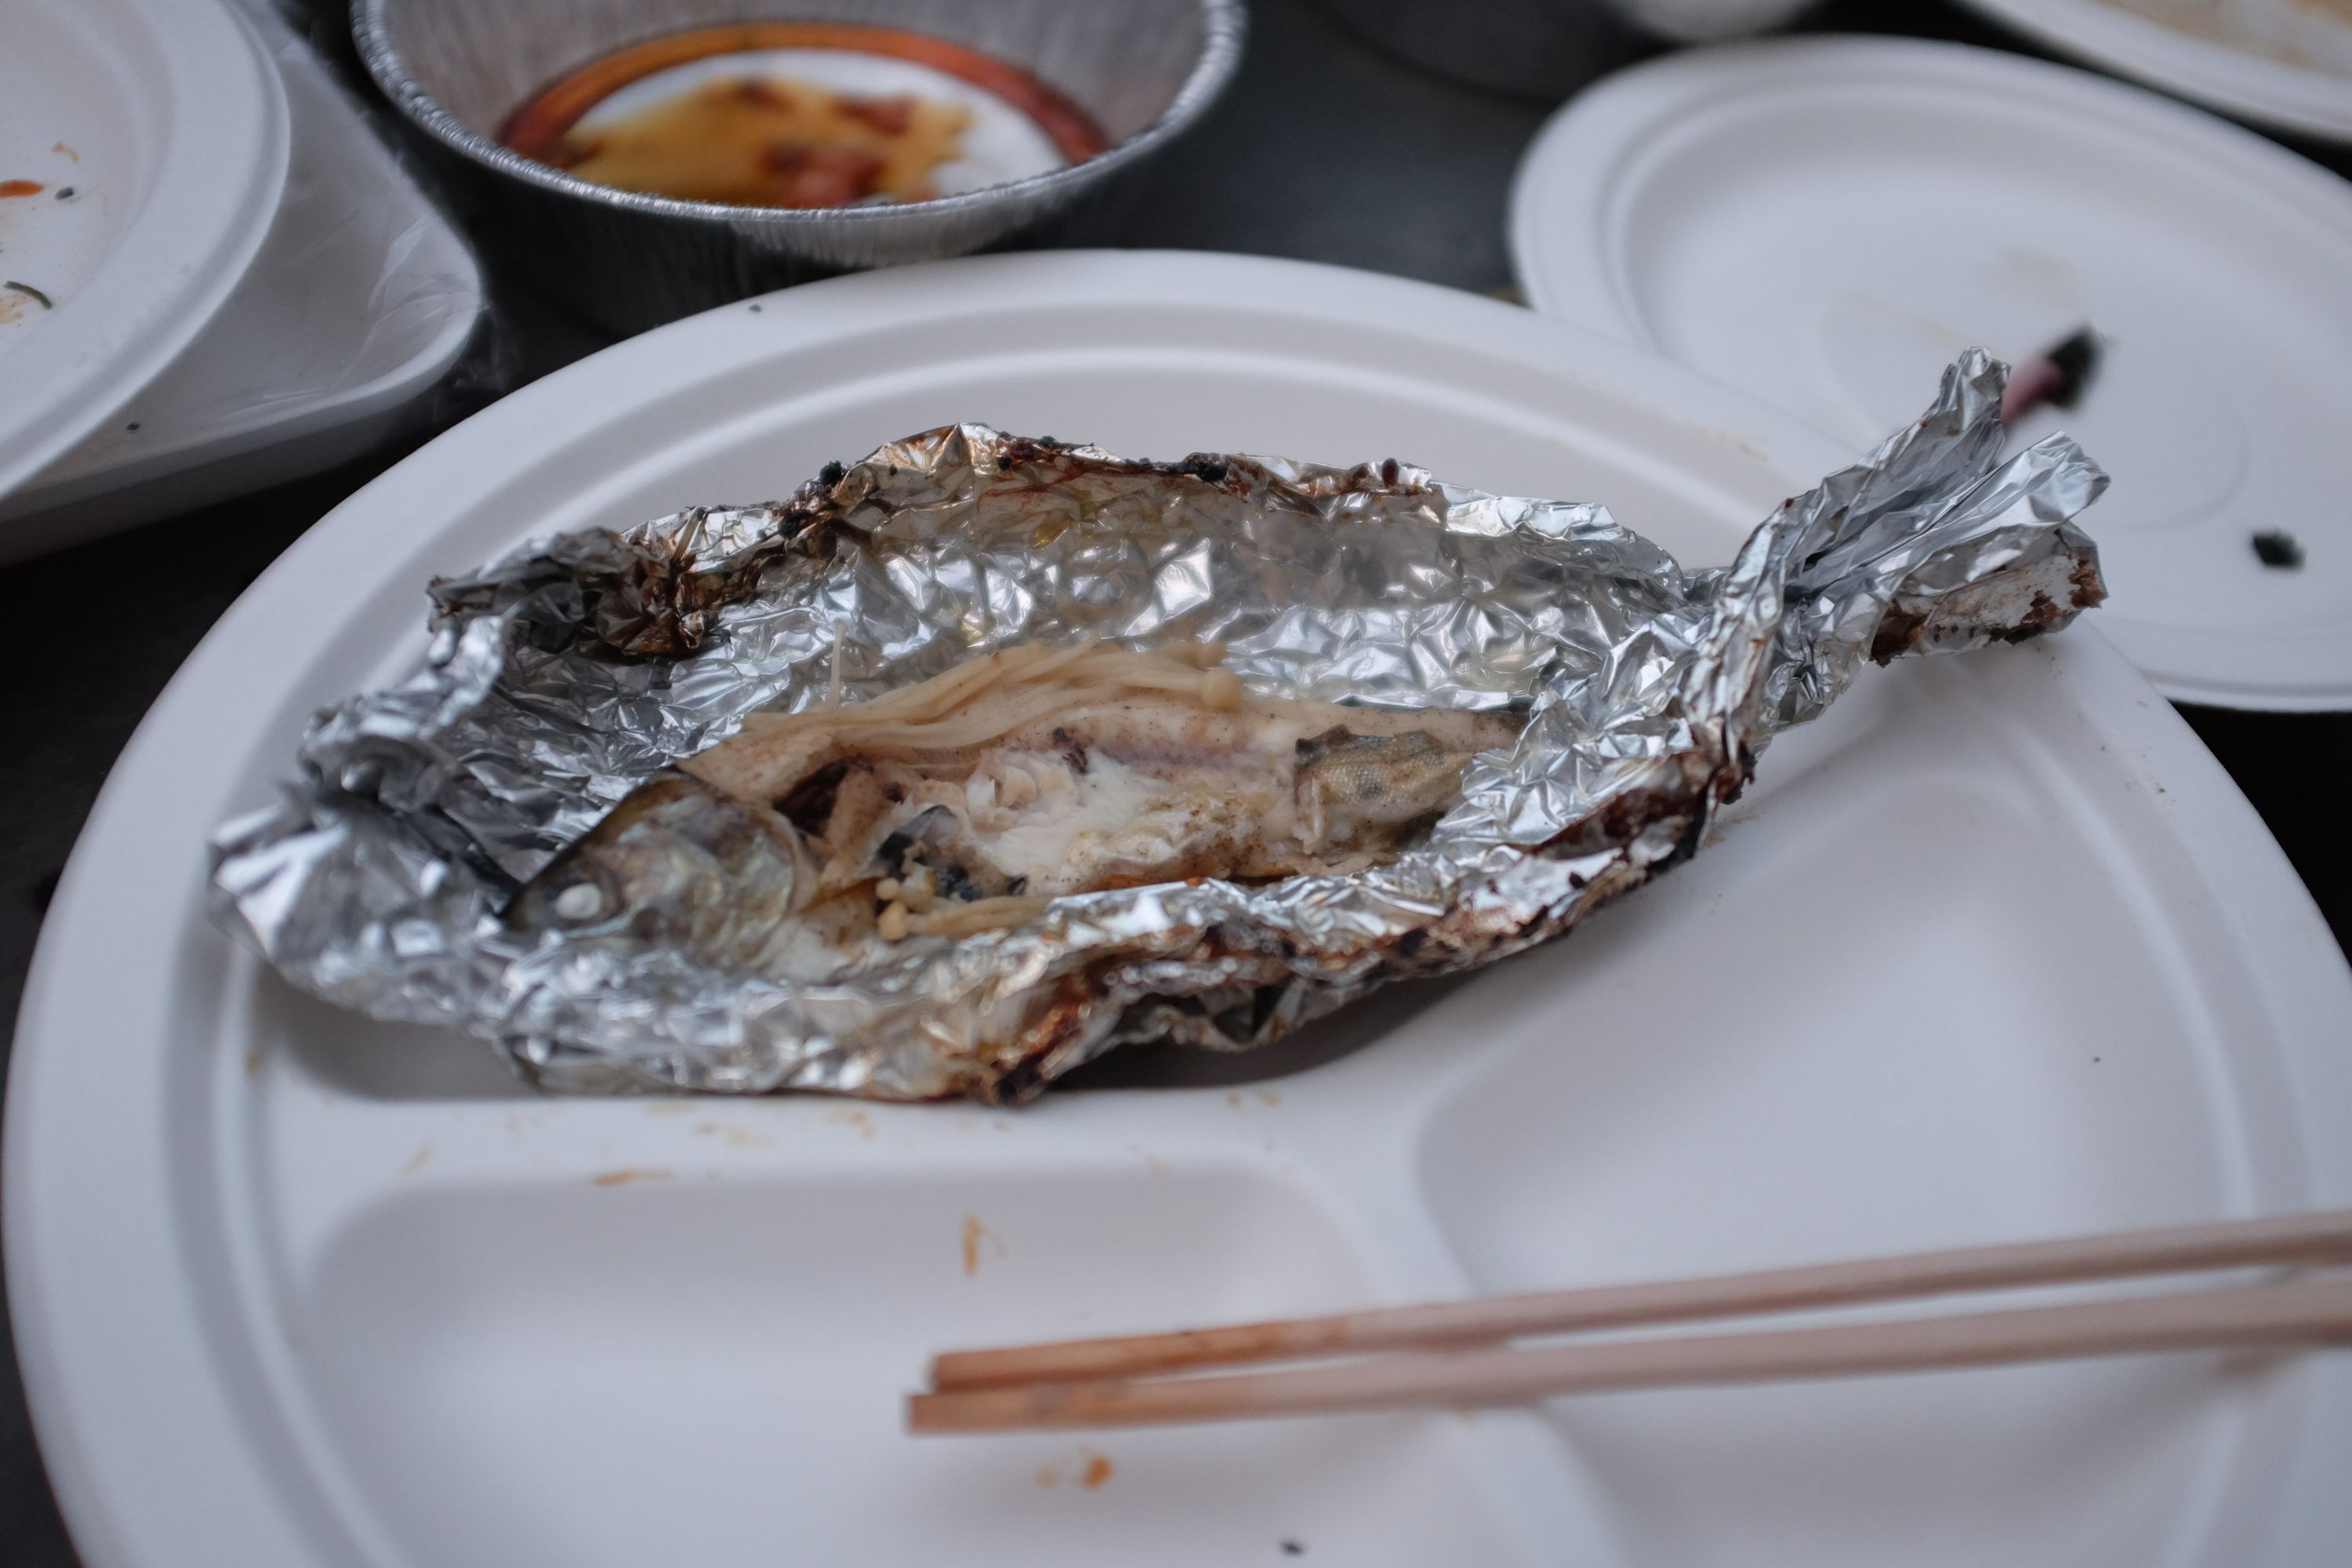 One of the fish, a Japanese trout, unwrapped on a paper plate.